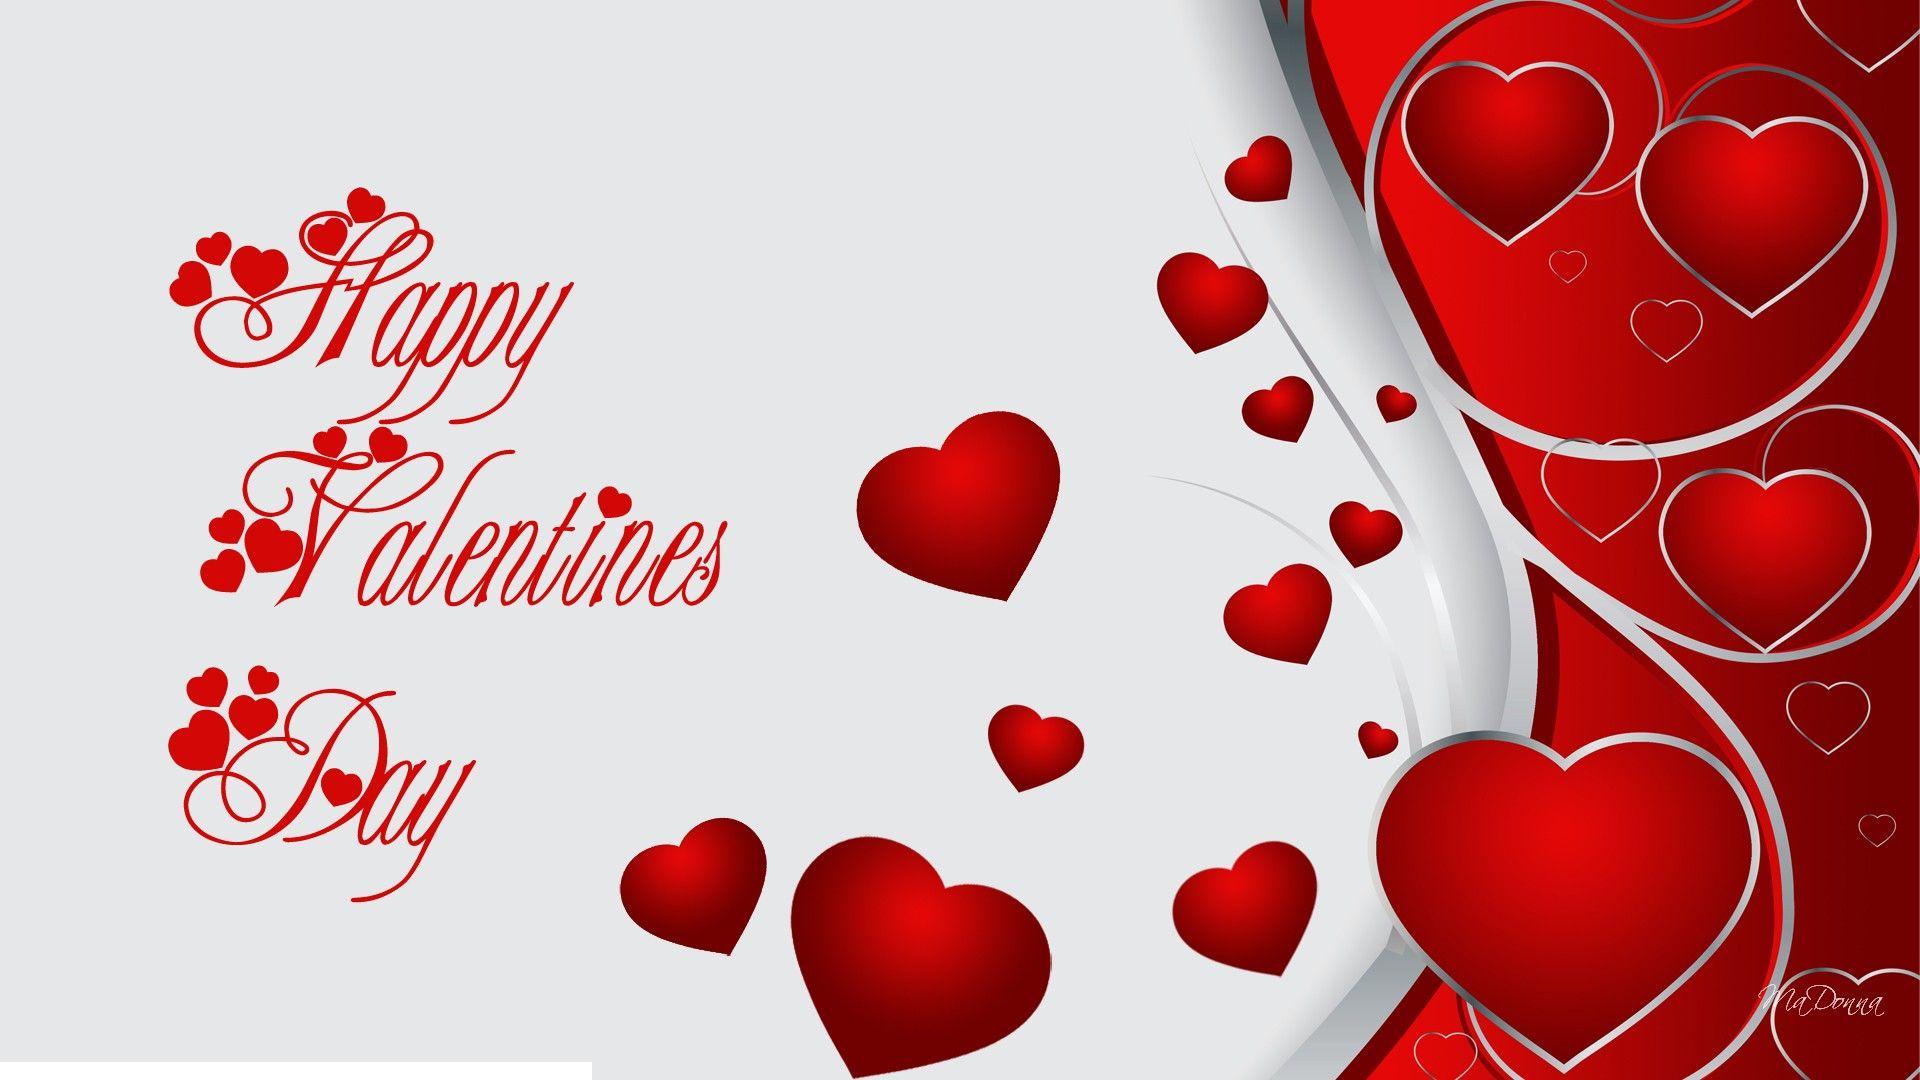 [10 Best Valentine's Day PC Wallpaper to Make the Mood Romantic